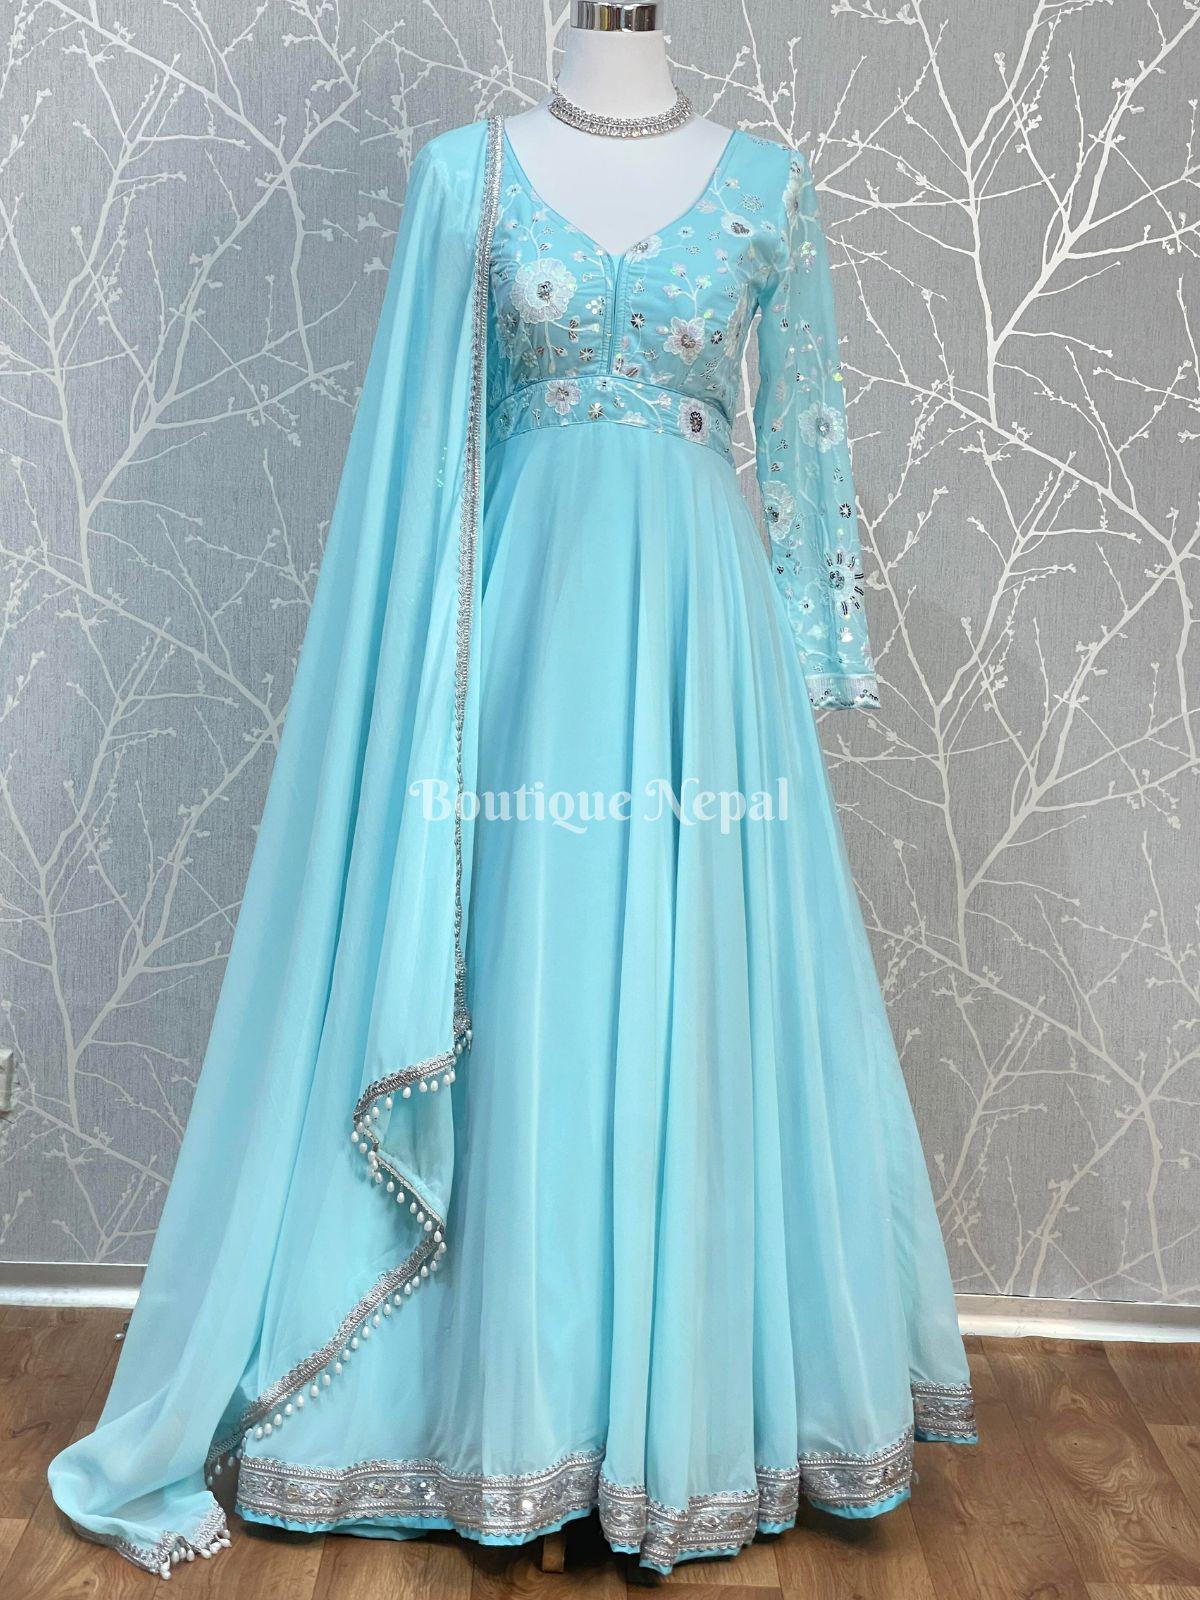 Embroidered Ankle Length Gown with Flair Net Sleeves